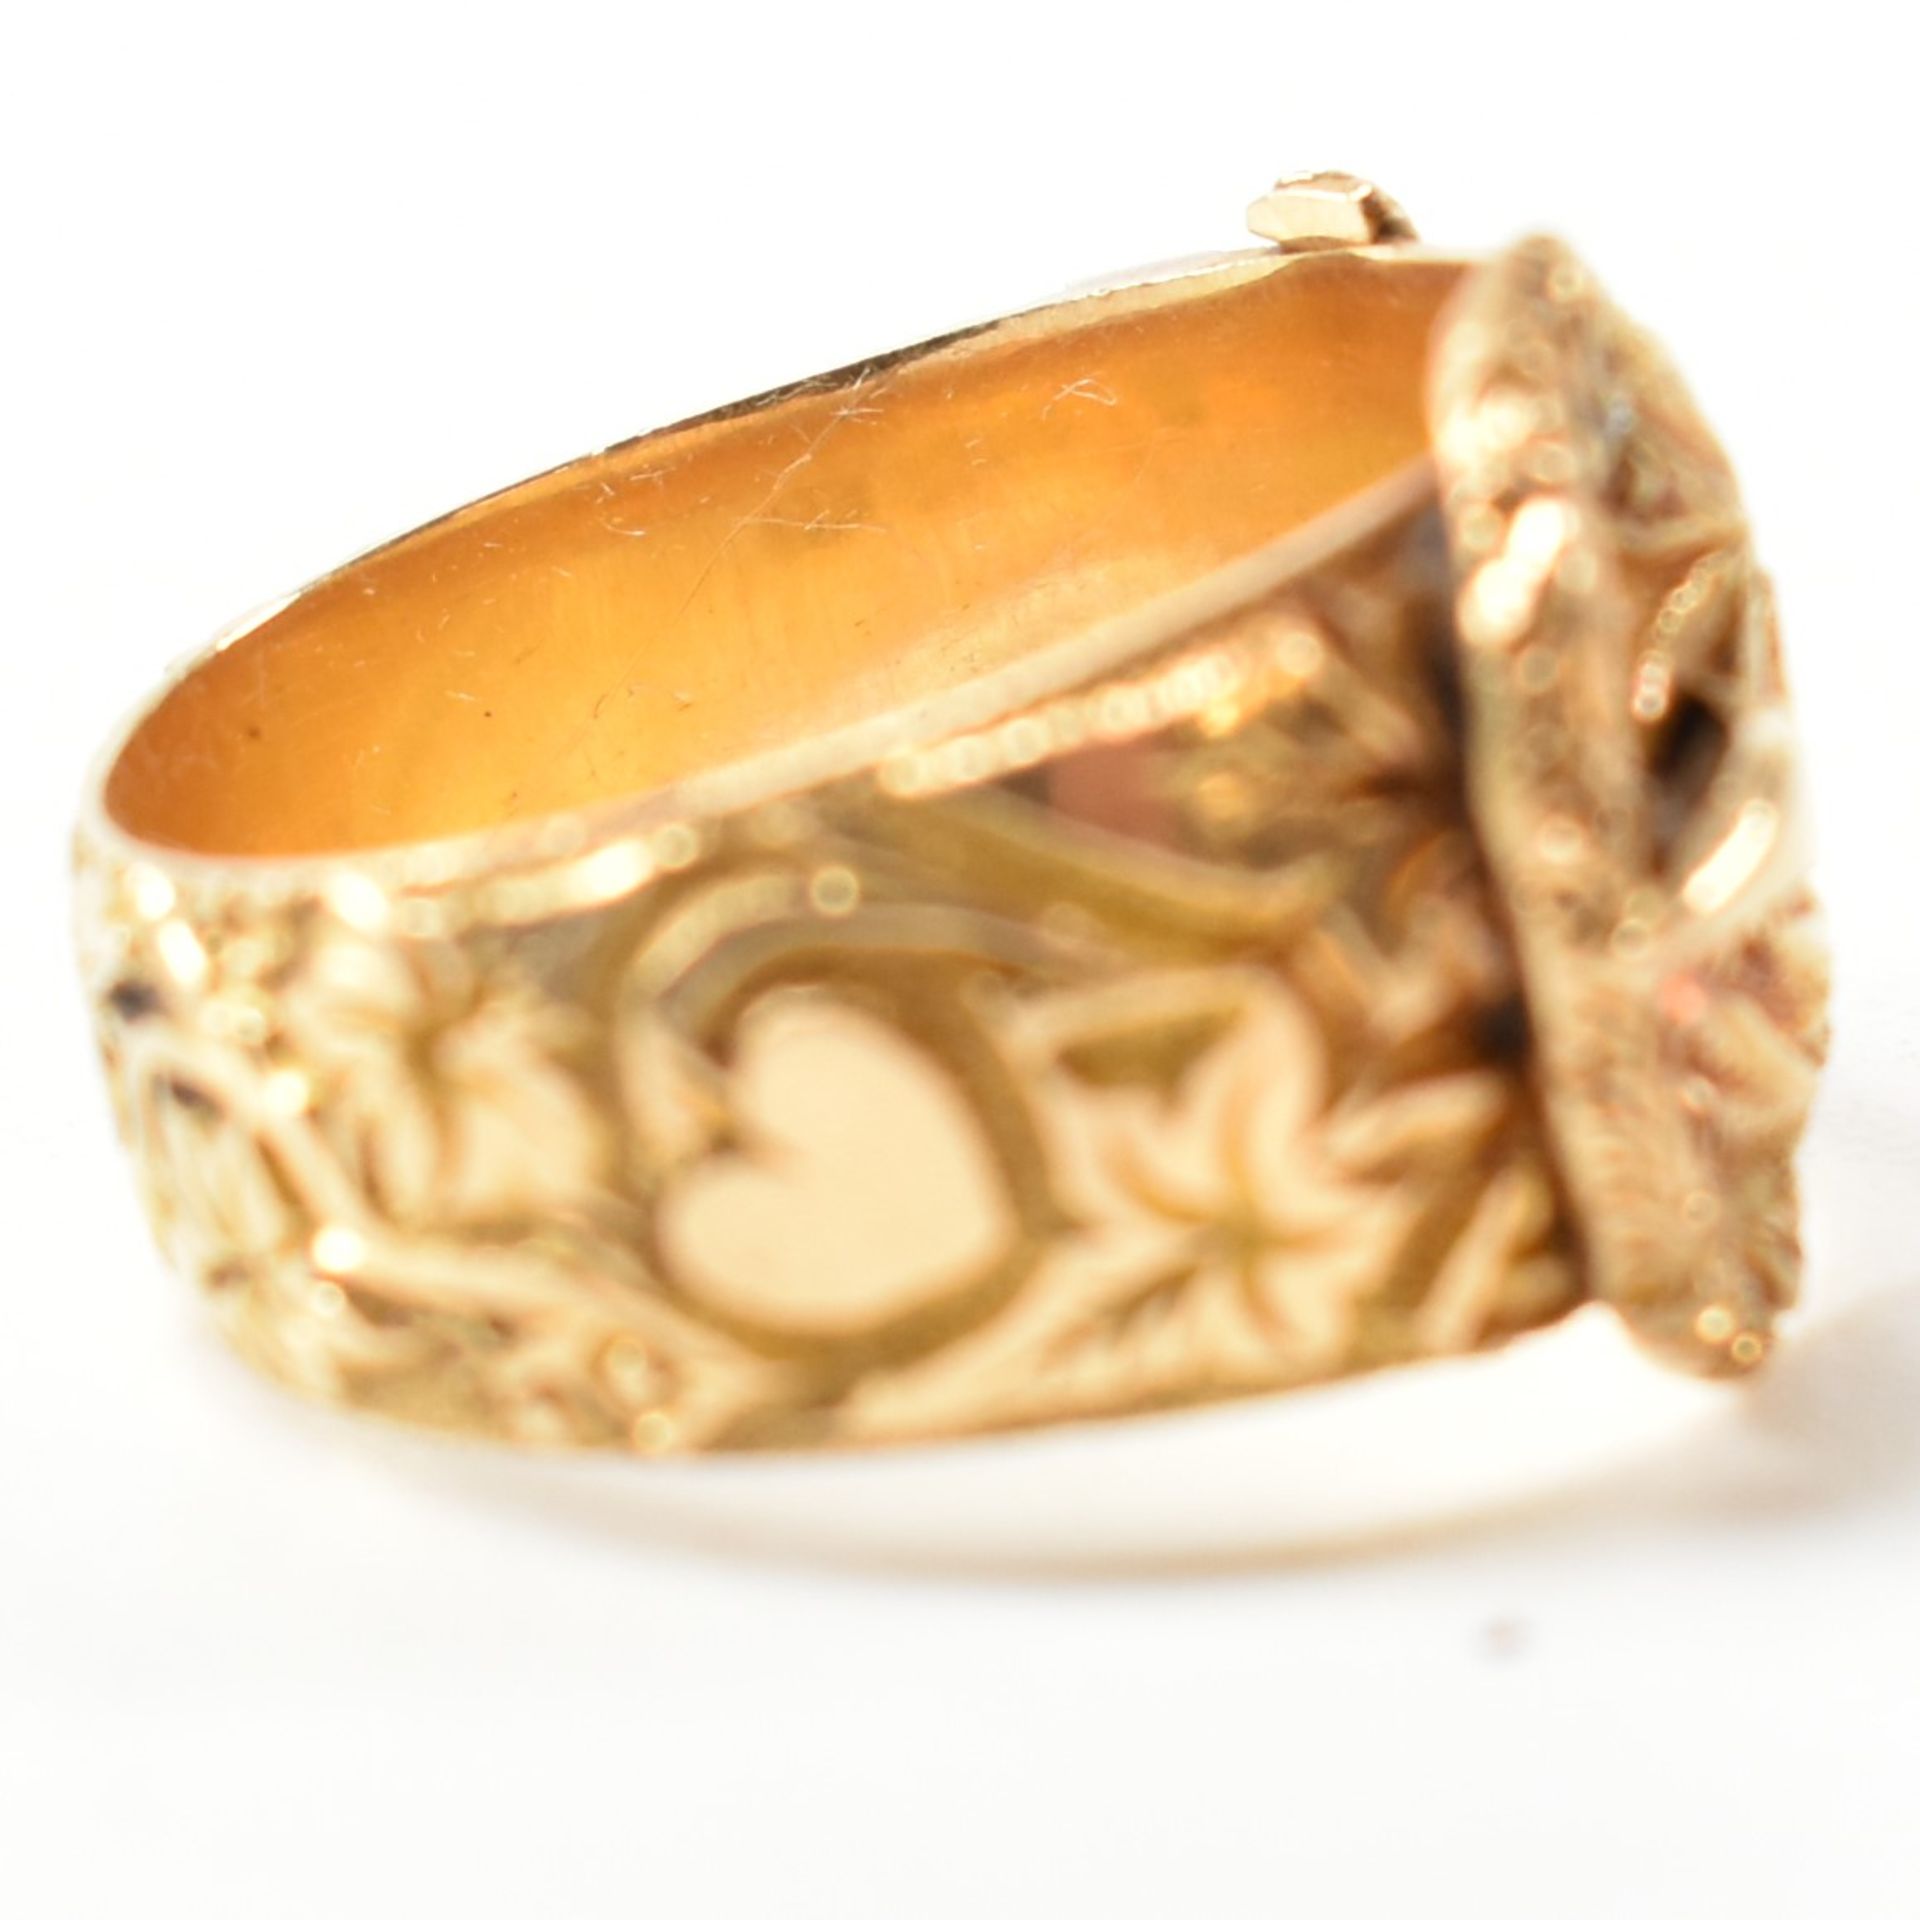 EDWARDIAN HALLMARKED 18CT GOLD BUCKLE RING - Image 4 of 9